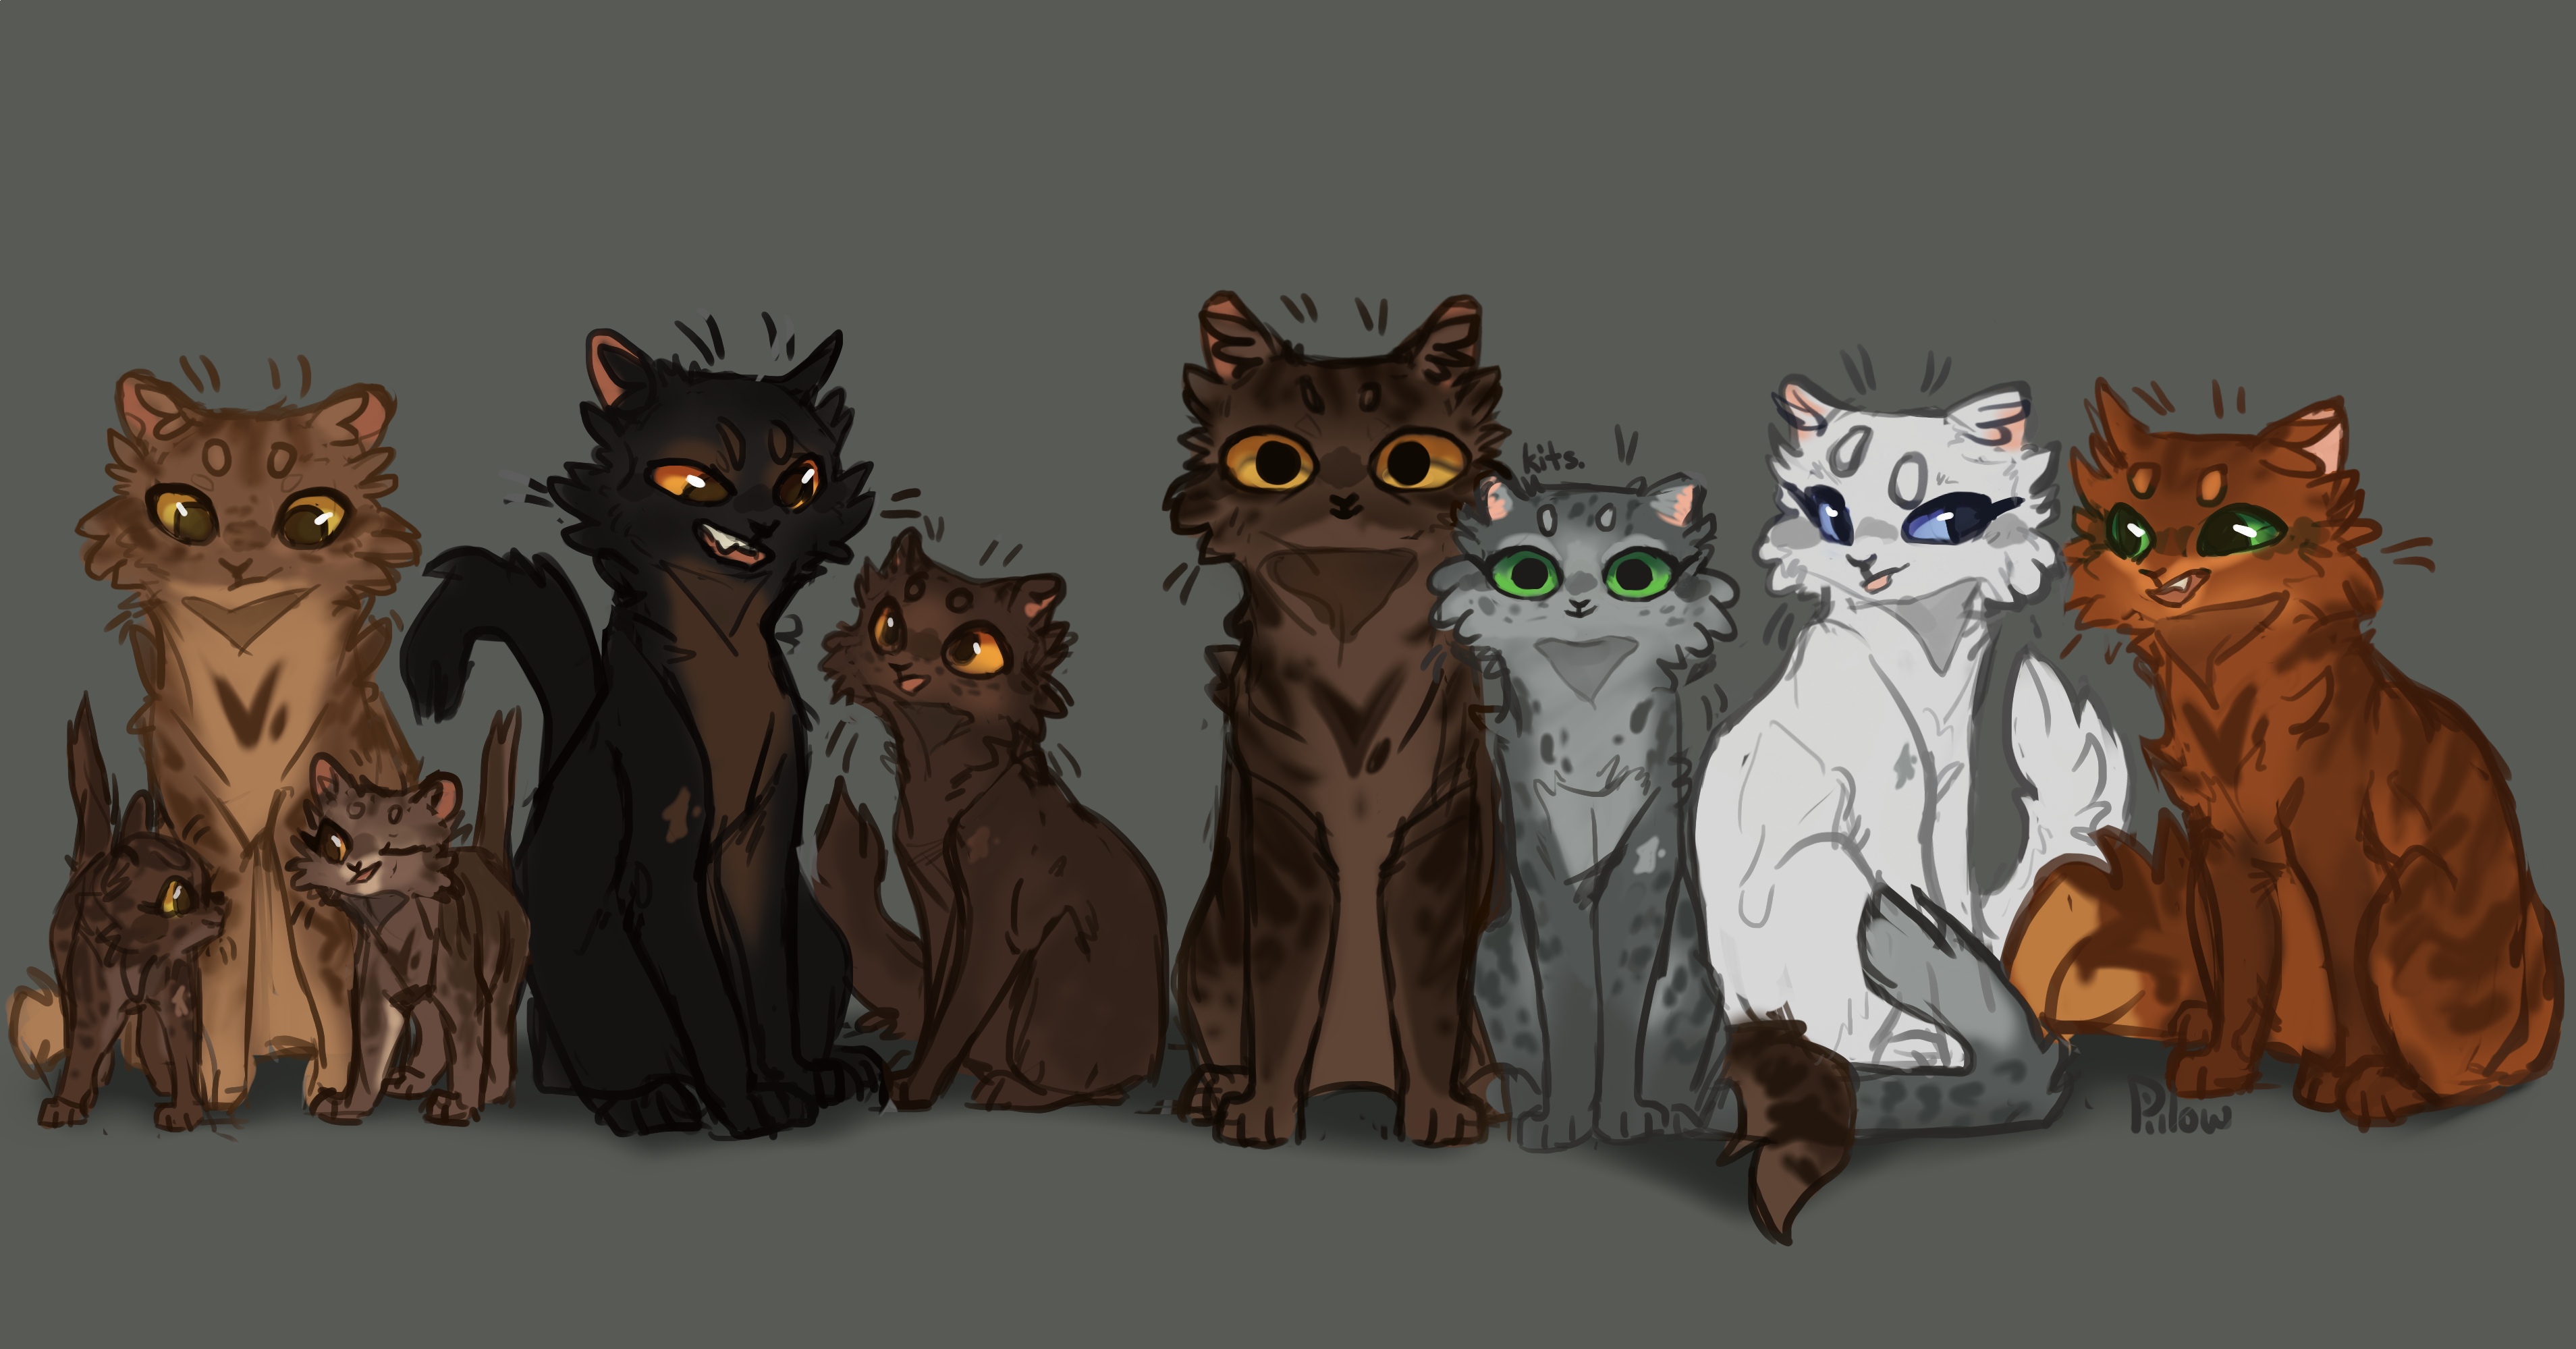 Ferncloud and Dustpelt's kits by GrayPillow on DeviantArt